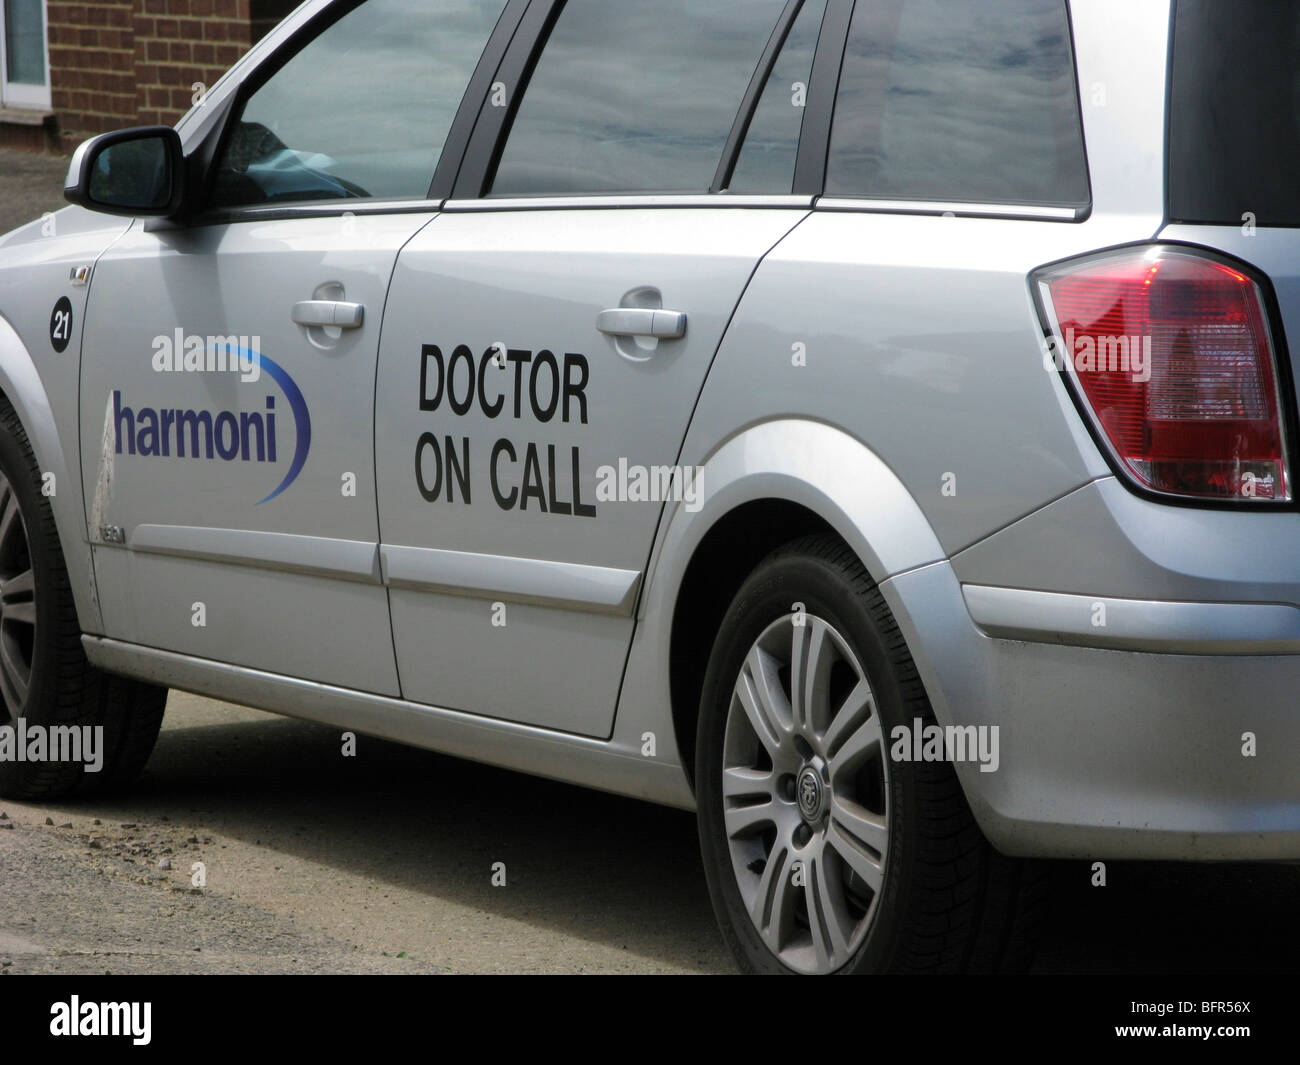 Doctor on call response transport car called out of hours due to an emergency Stock Photo